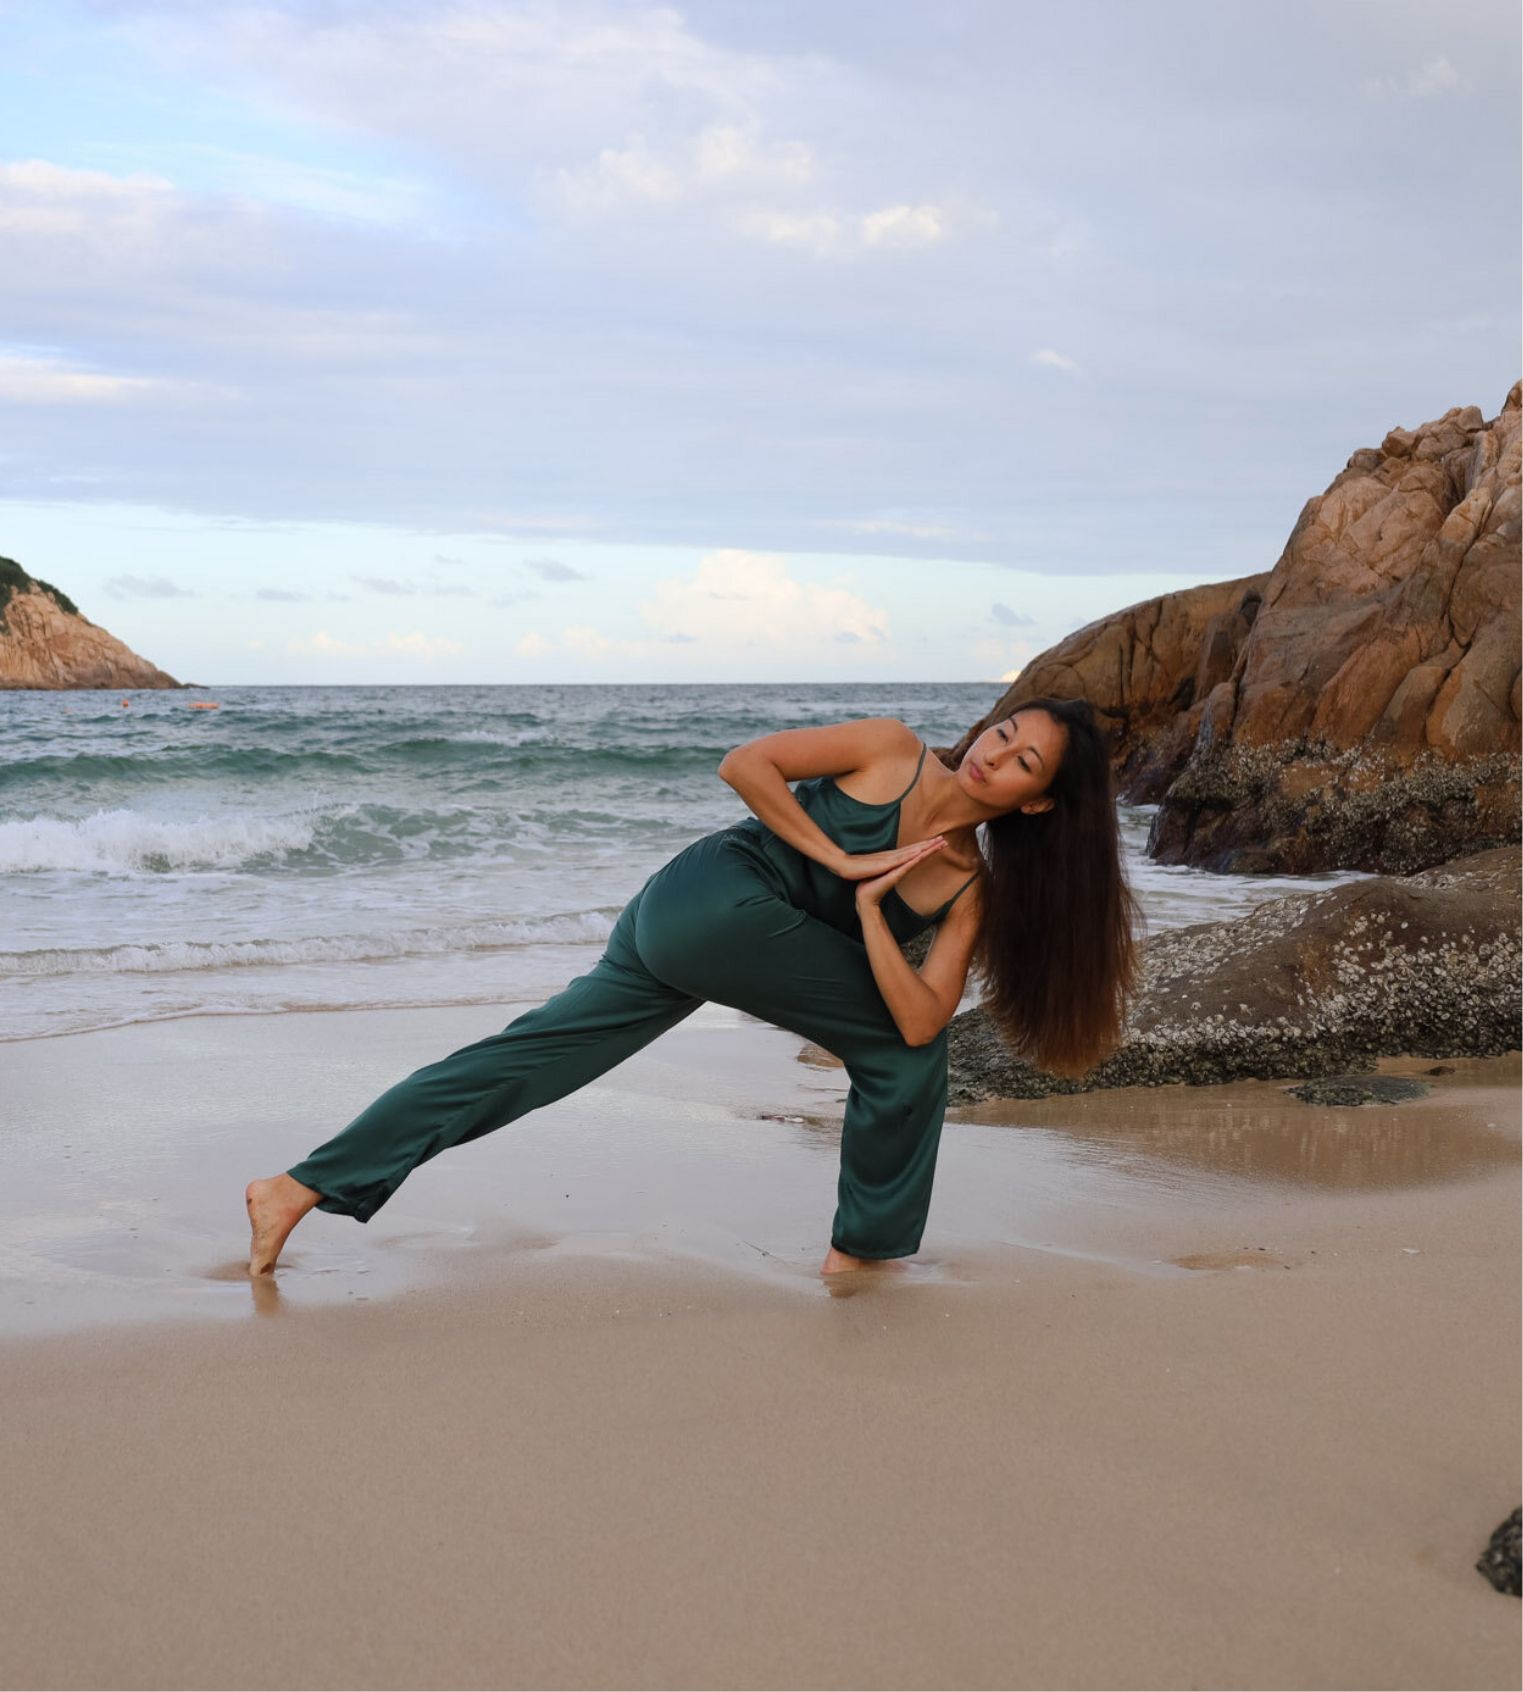 Karina Curlewis performing lunge with prayer twist pose in sandy beach by the ocean